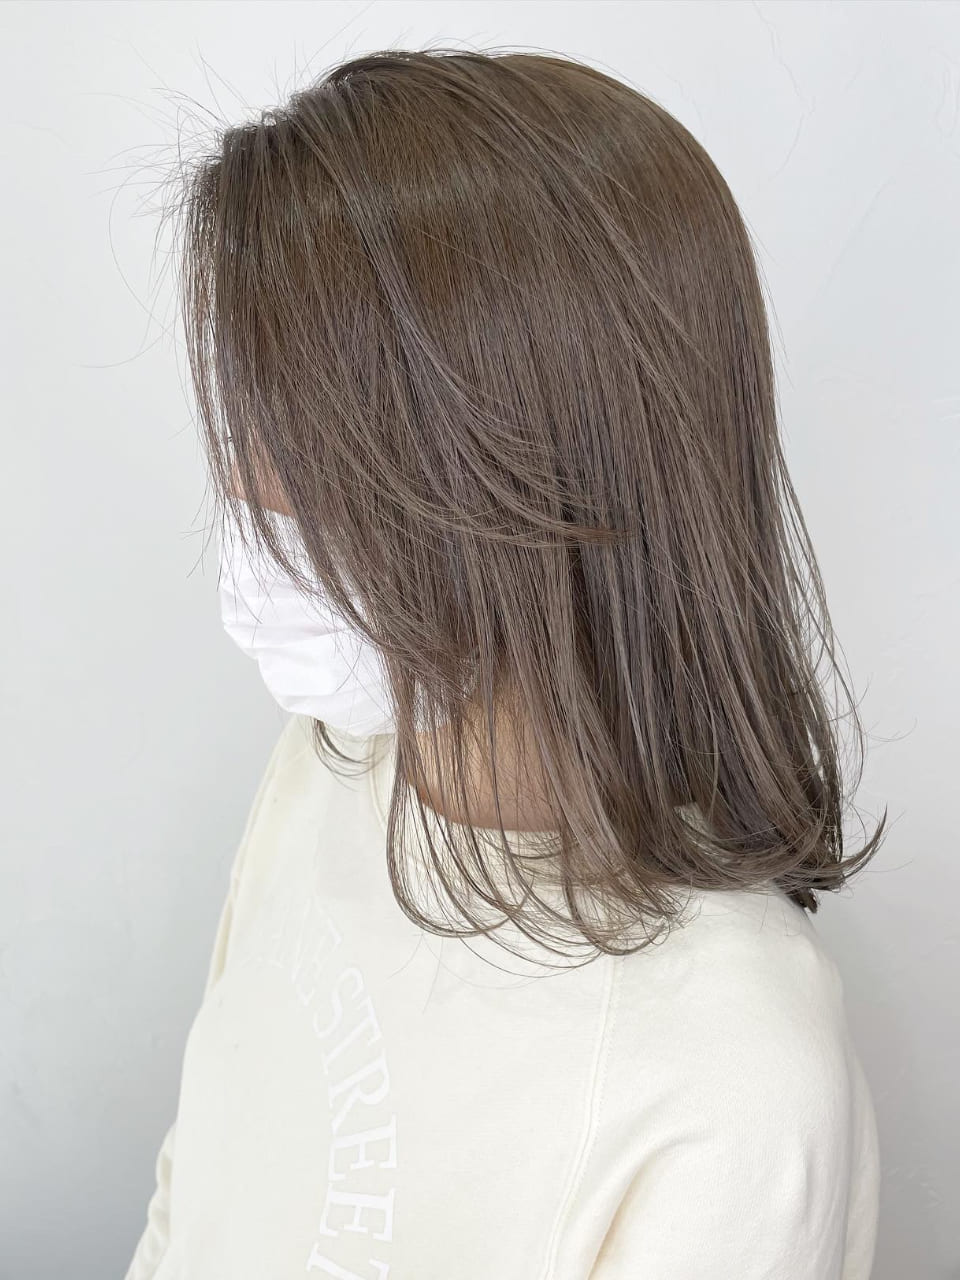 <!-- hairstyle-25 -->